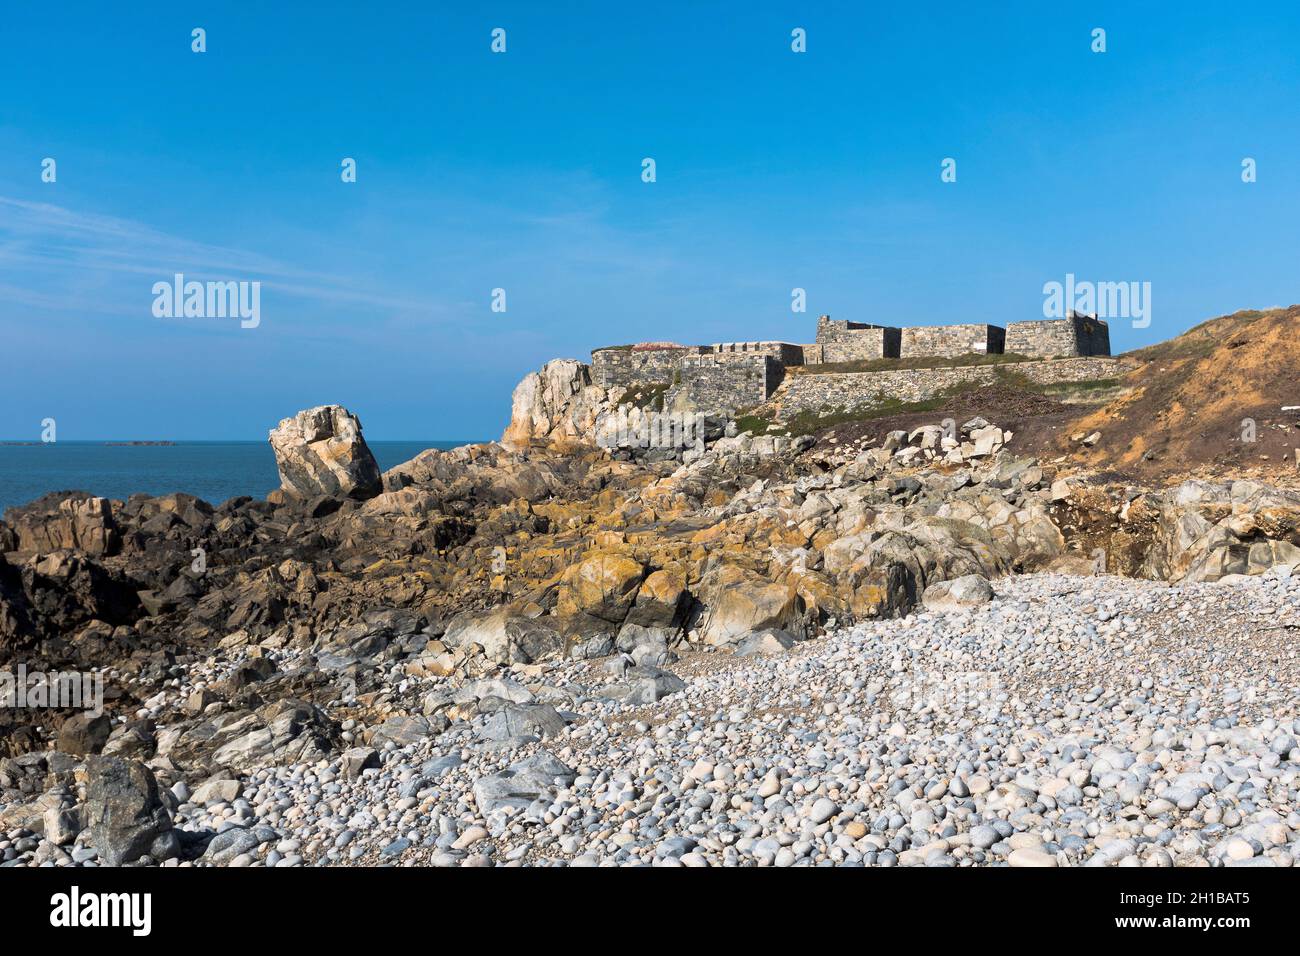 dh Fort le marchant VALE GUERNSEY Old ruin barracks Stock Photo